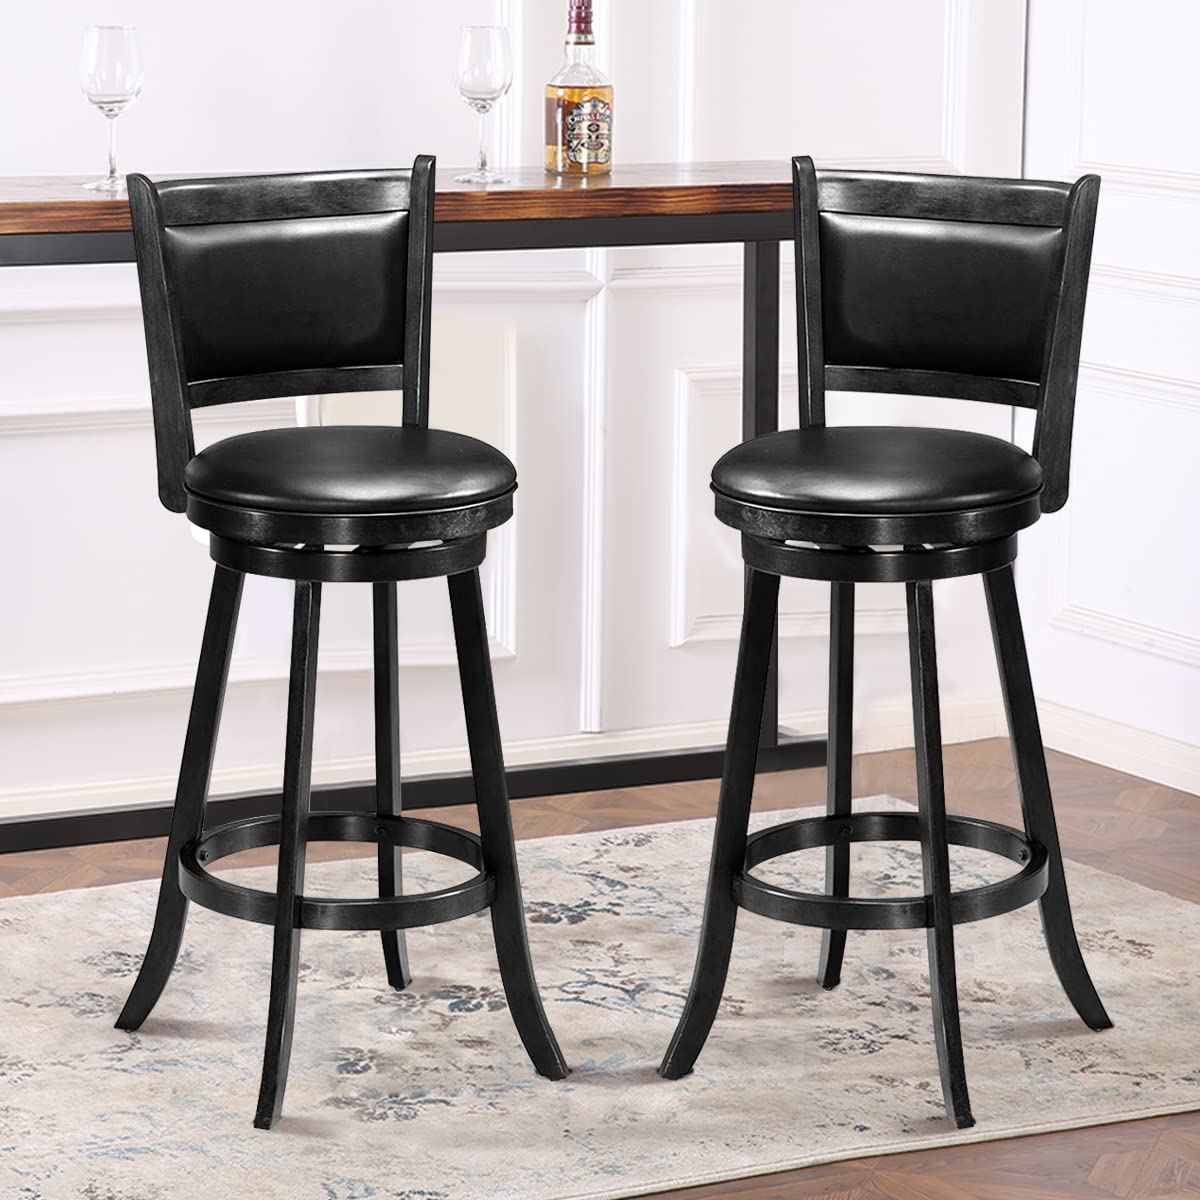 Giantex Bar Stools Set of 2, Accent Wooden Swivel Barstool Backed Dining Chair